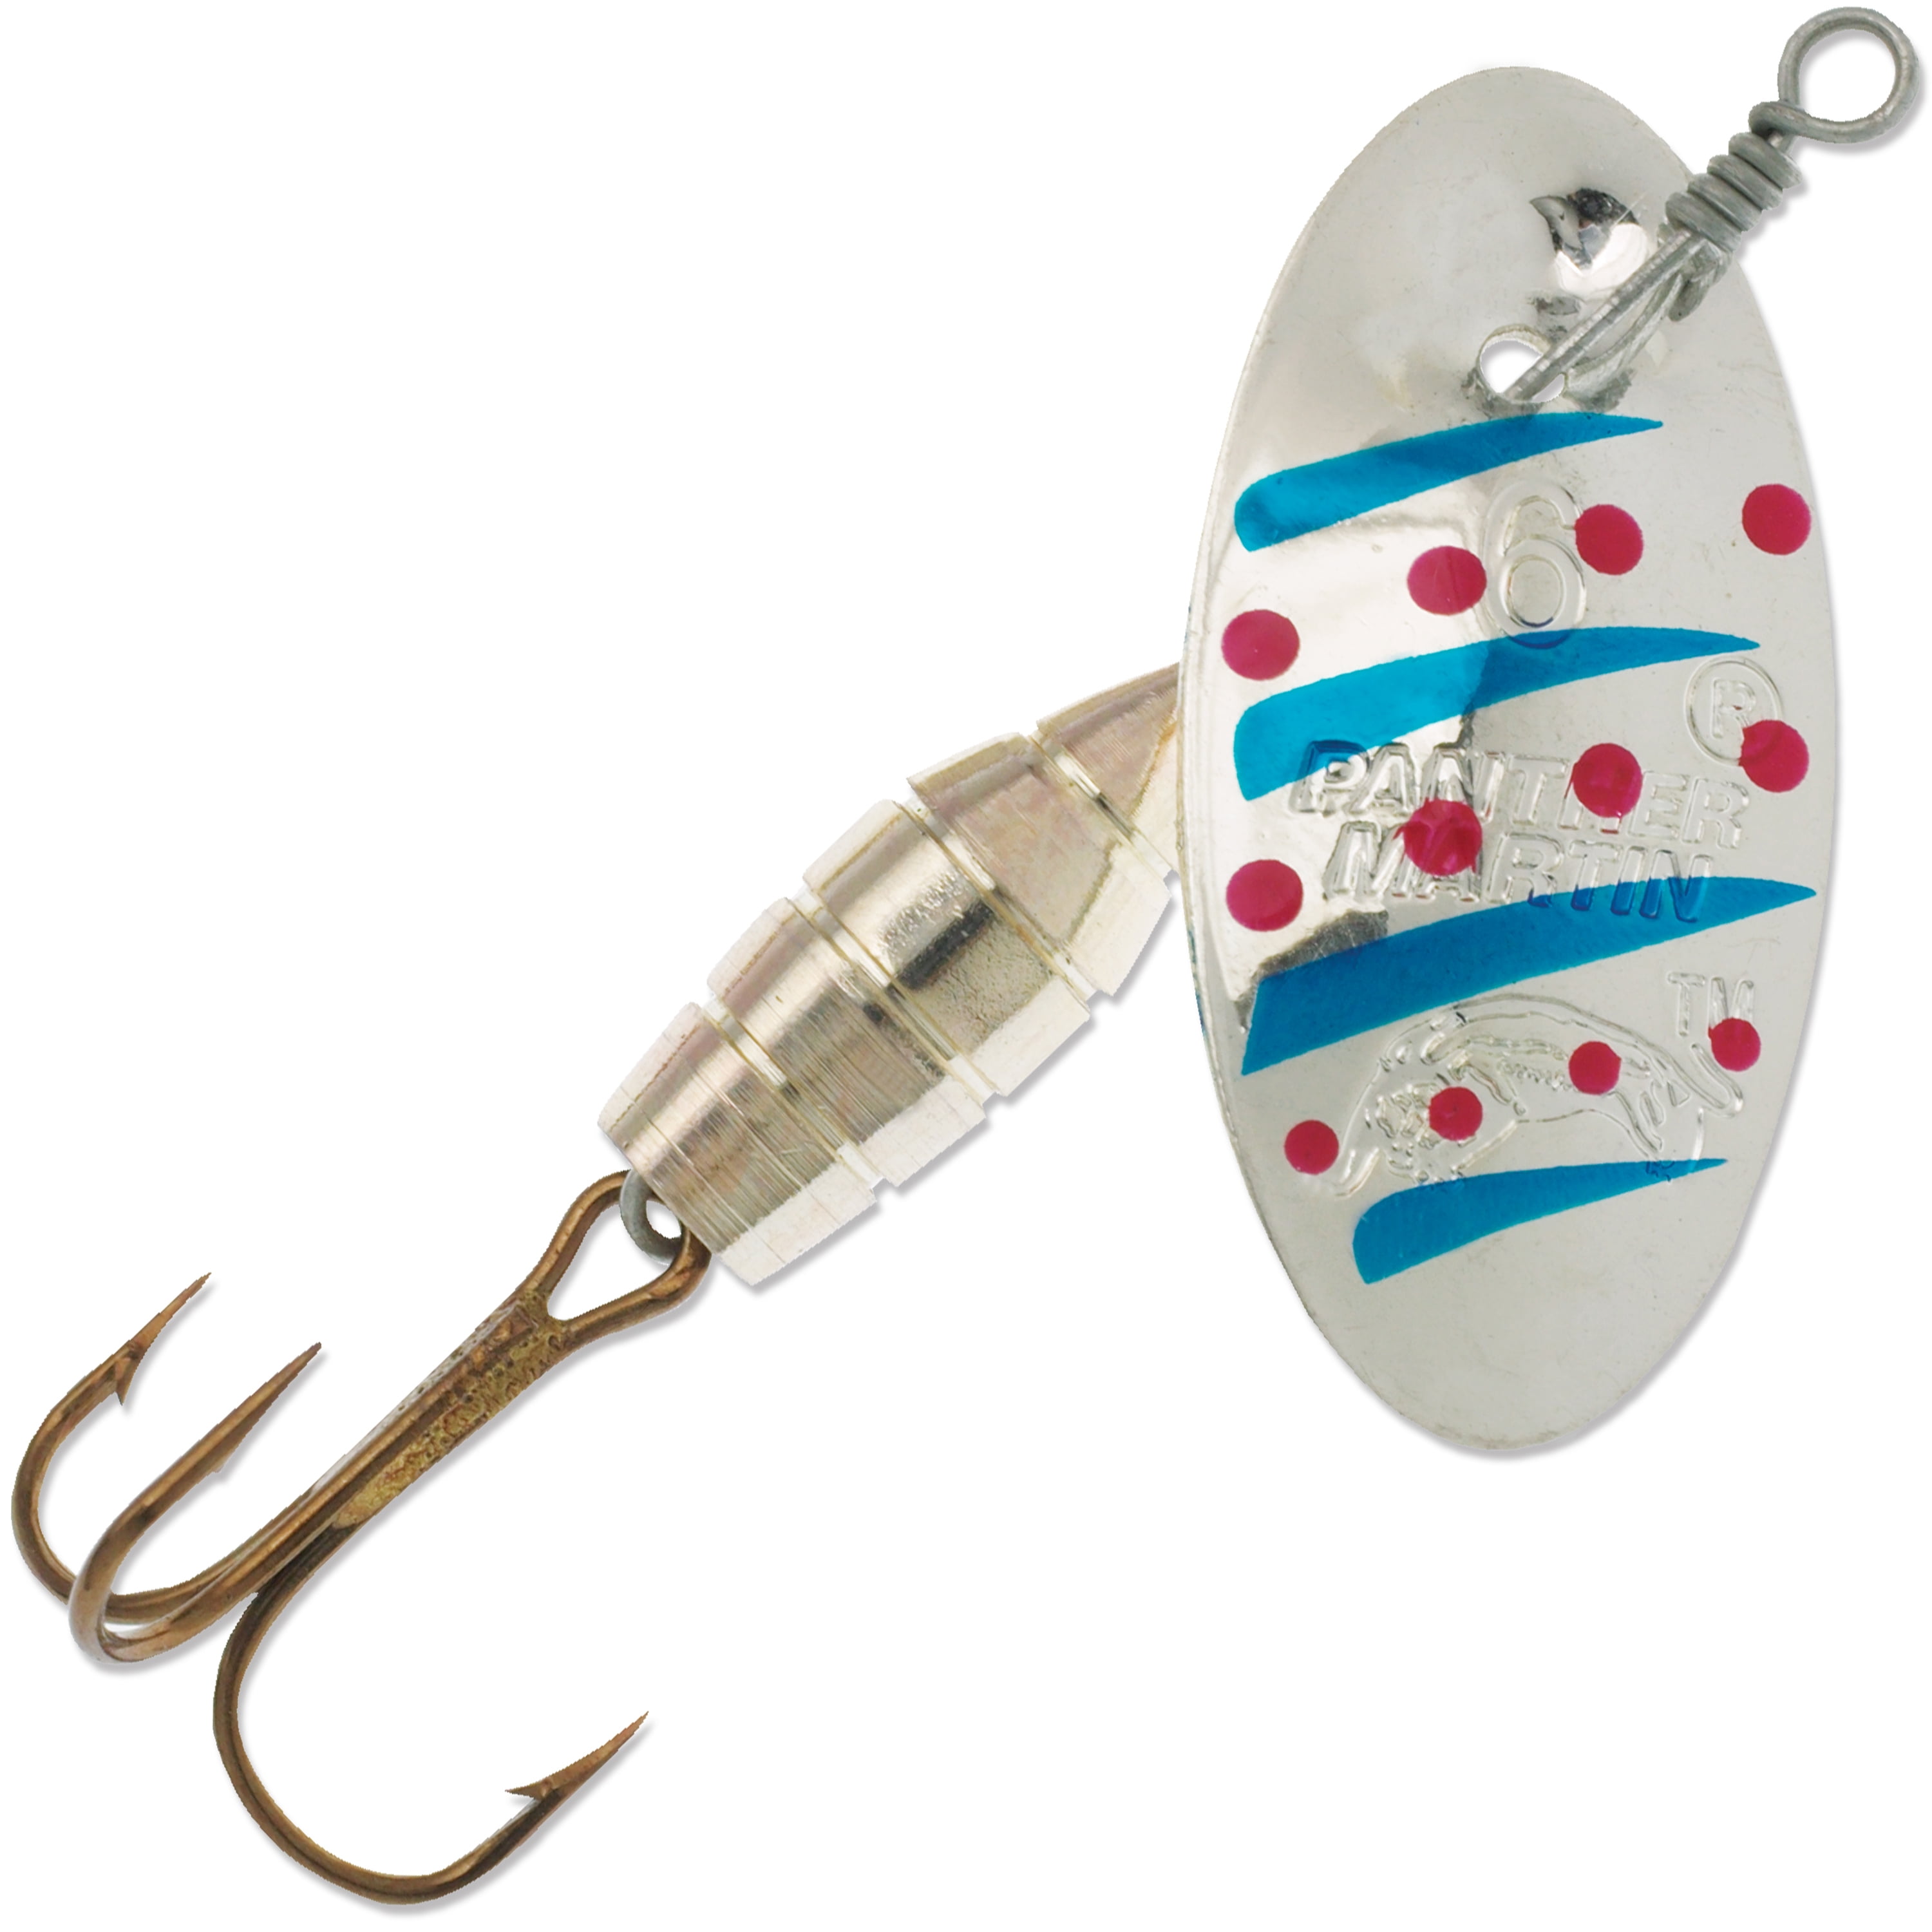 Panther Martin PMD_6_S Deluxe Barrel Body Spinners Fishing Lure - Silver -  6 (1/4 oz) 